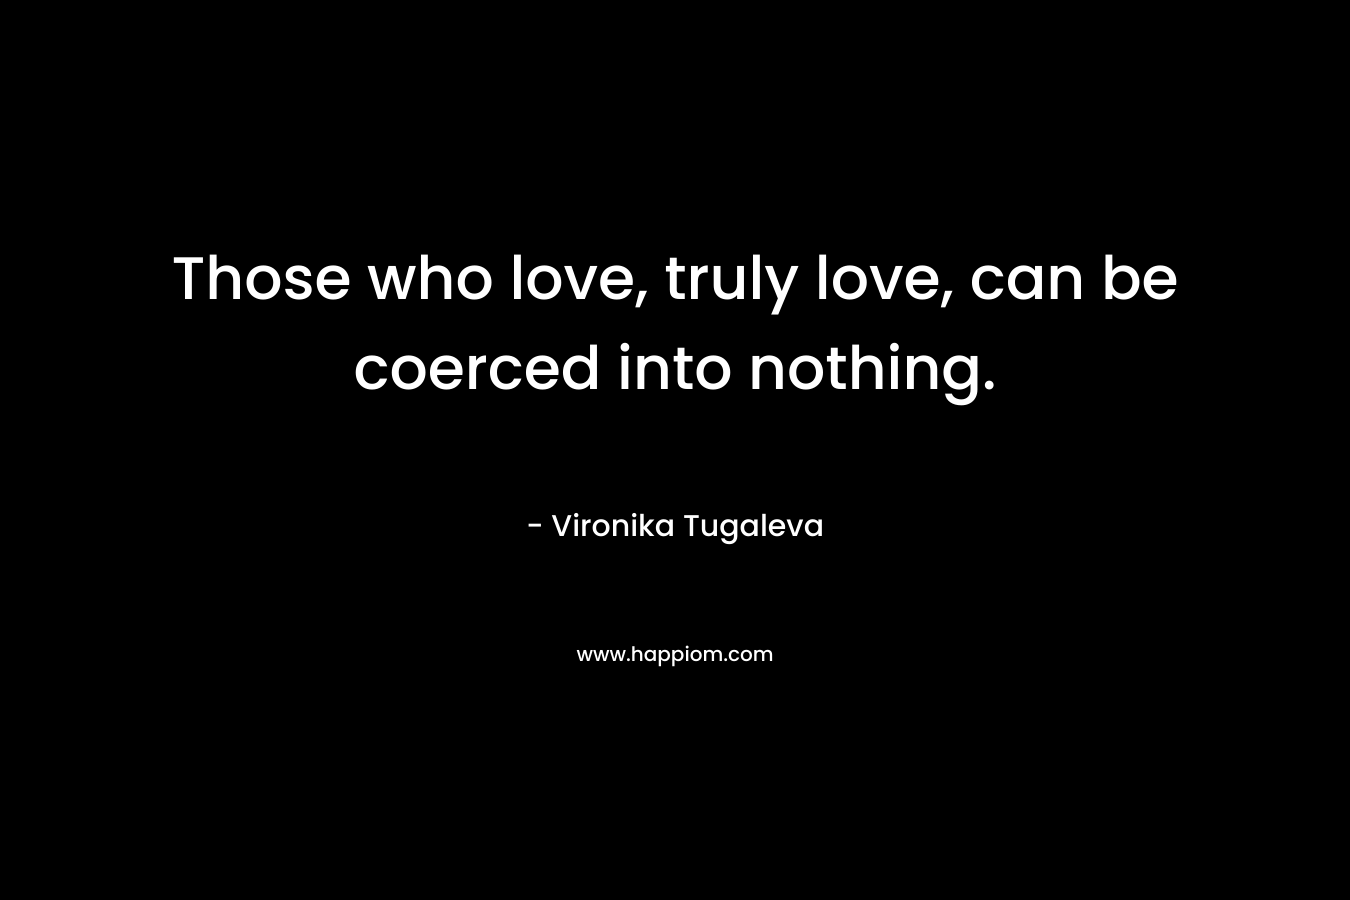 Those who love, truly love, can be coerced into nothing.